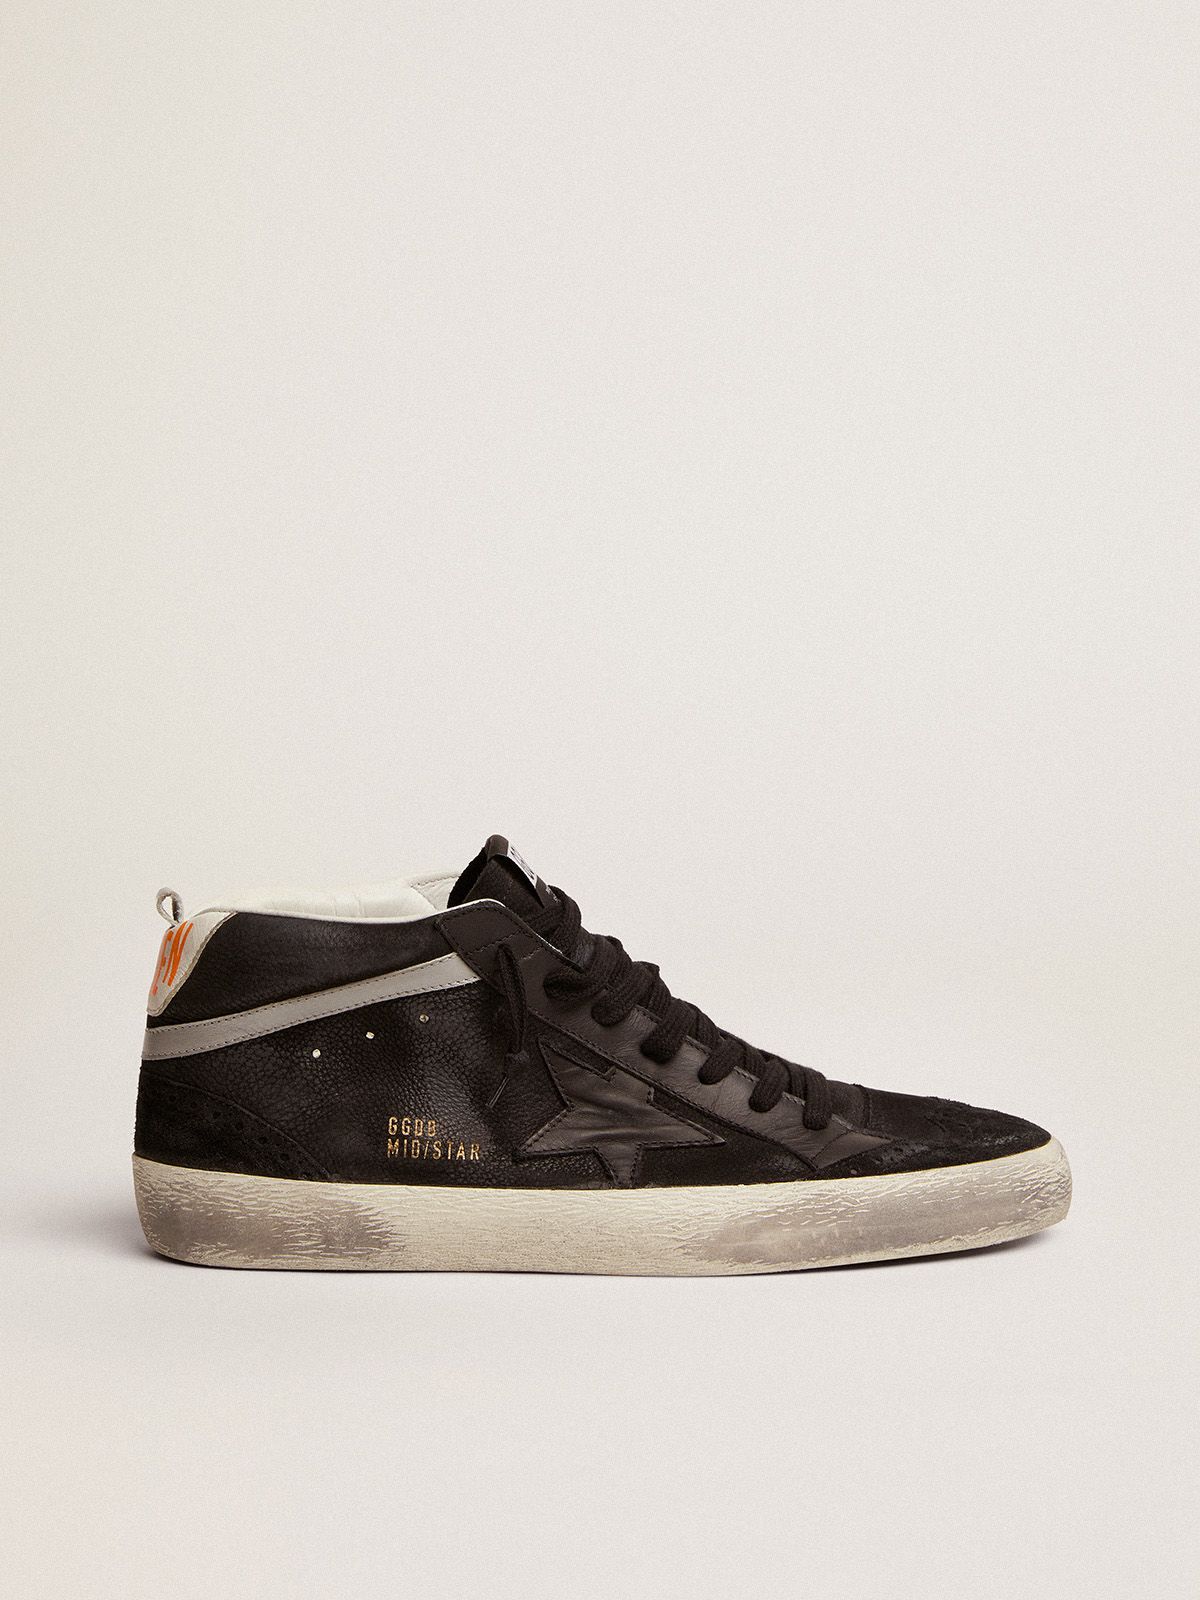 Golden Goose Sconto Uomo Mid Star sneakers in black nubuck with black leather star and silver laminated leather flash